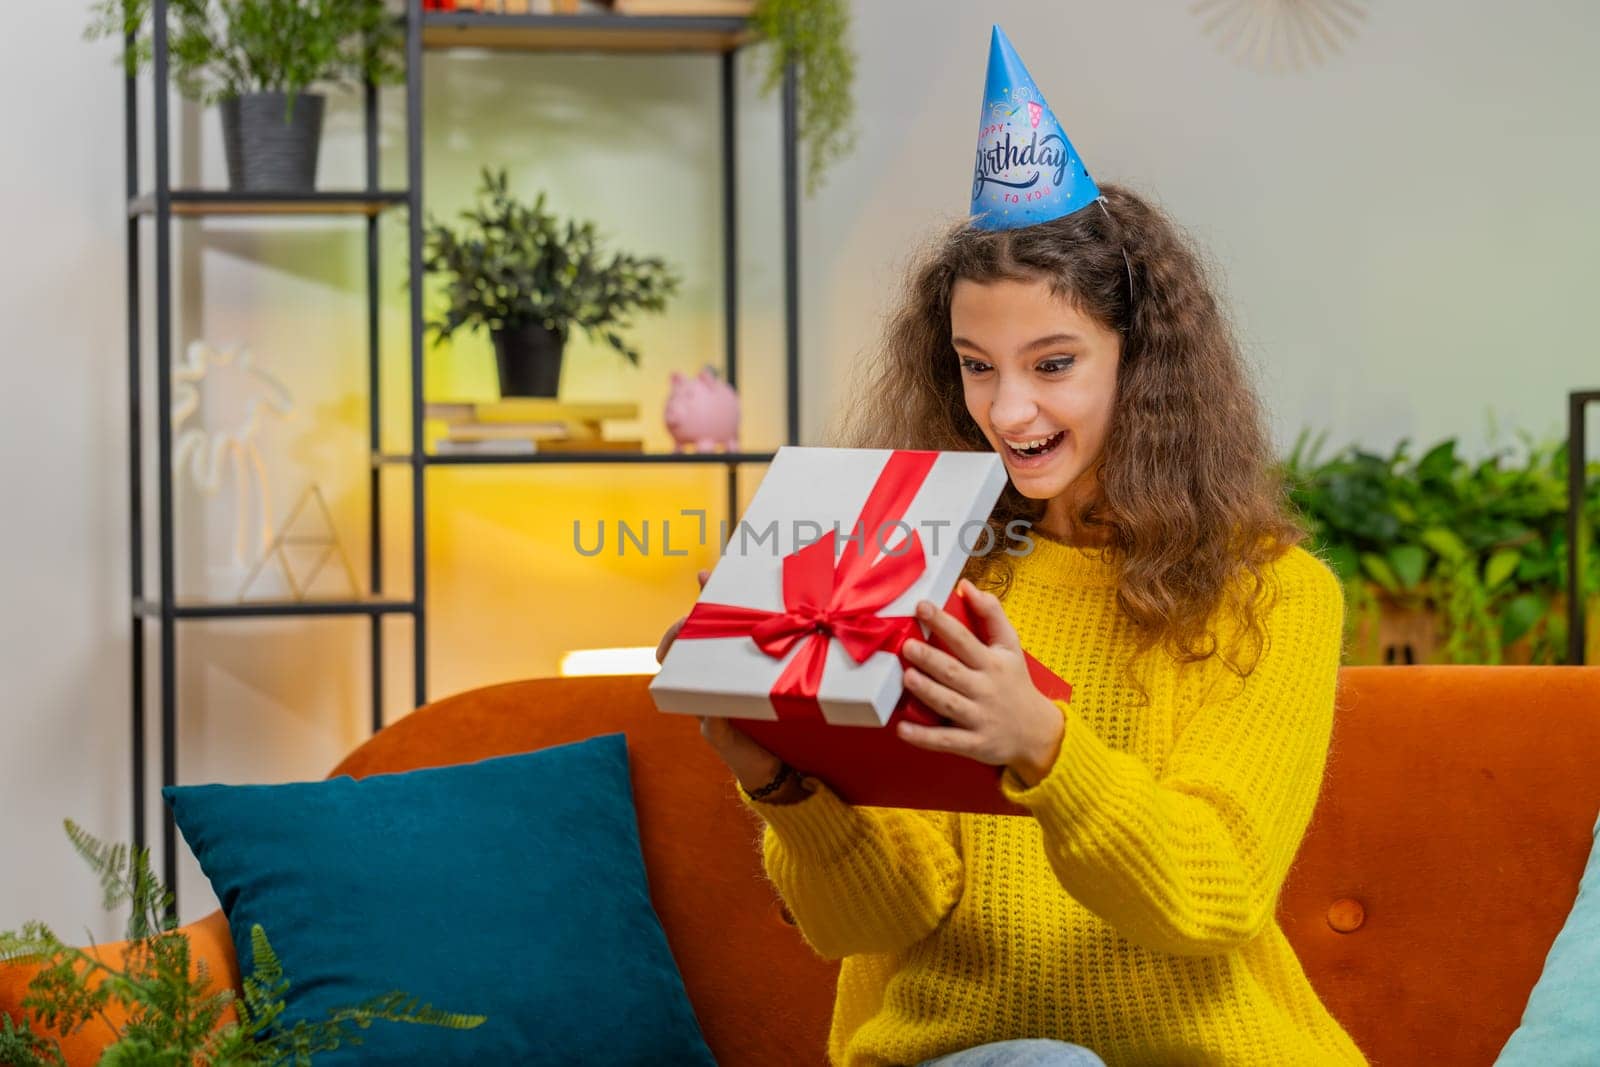 Happy 14-15 years child girl wears festive birthday cap hat hold gift box with ribbon congratulating. Teenager female kid celebrating party event opening delivery greeting present at home room on sofa